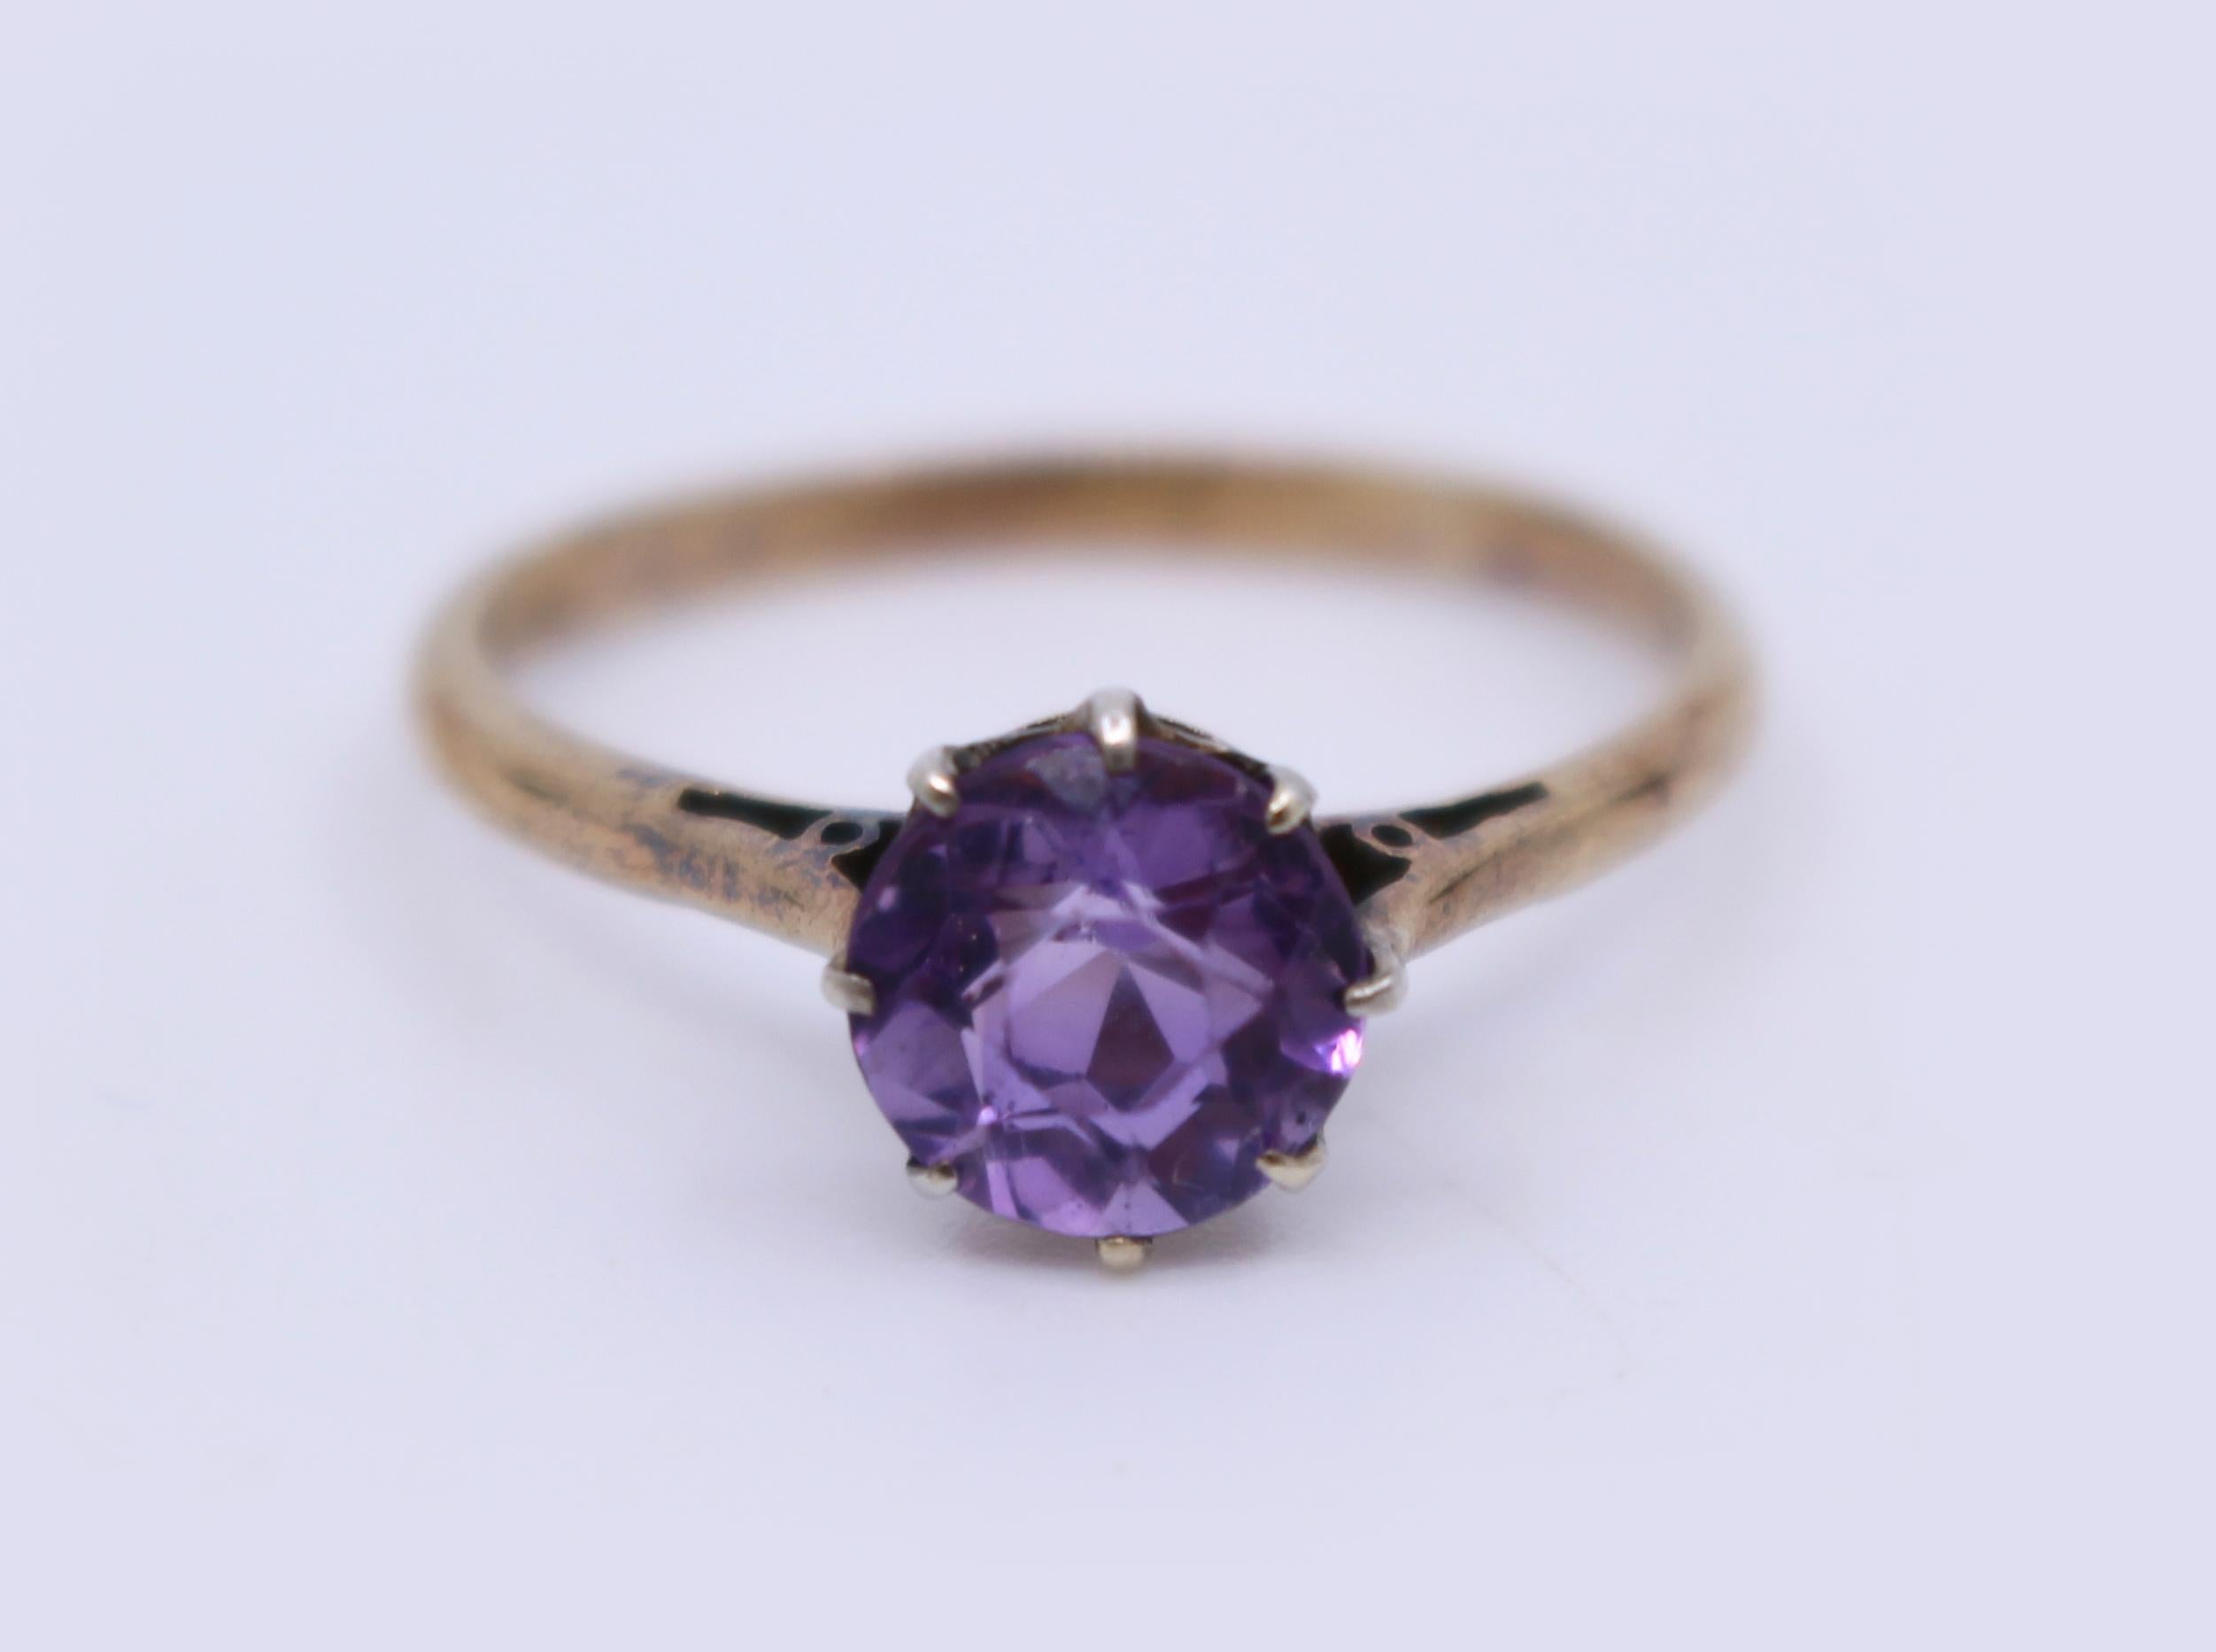 Period:
Modern

Stone
Vibrant purple amethyst, measuring approximate 7 x 7 mm.

Gold 
18-carat gold, stamped

Weight 
2.1 g

Ring size:
O 1/2 (UK), 7.5 (US)

Condition:
Very good vintage condition


 

Amethyst 18-carat yellow